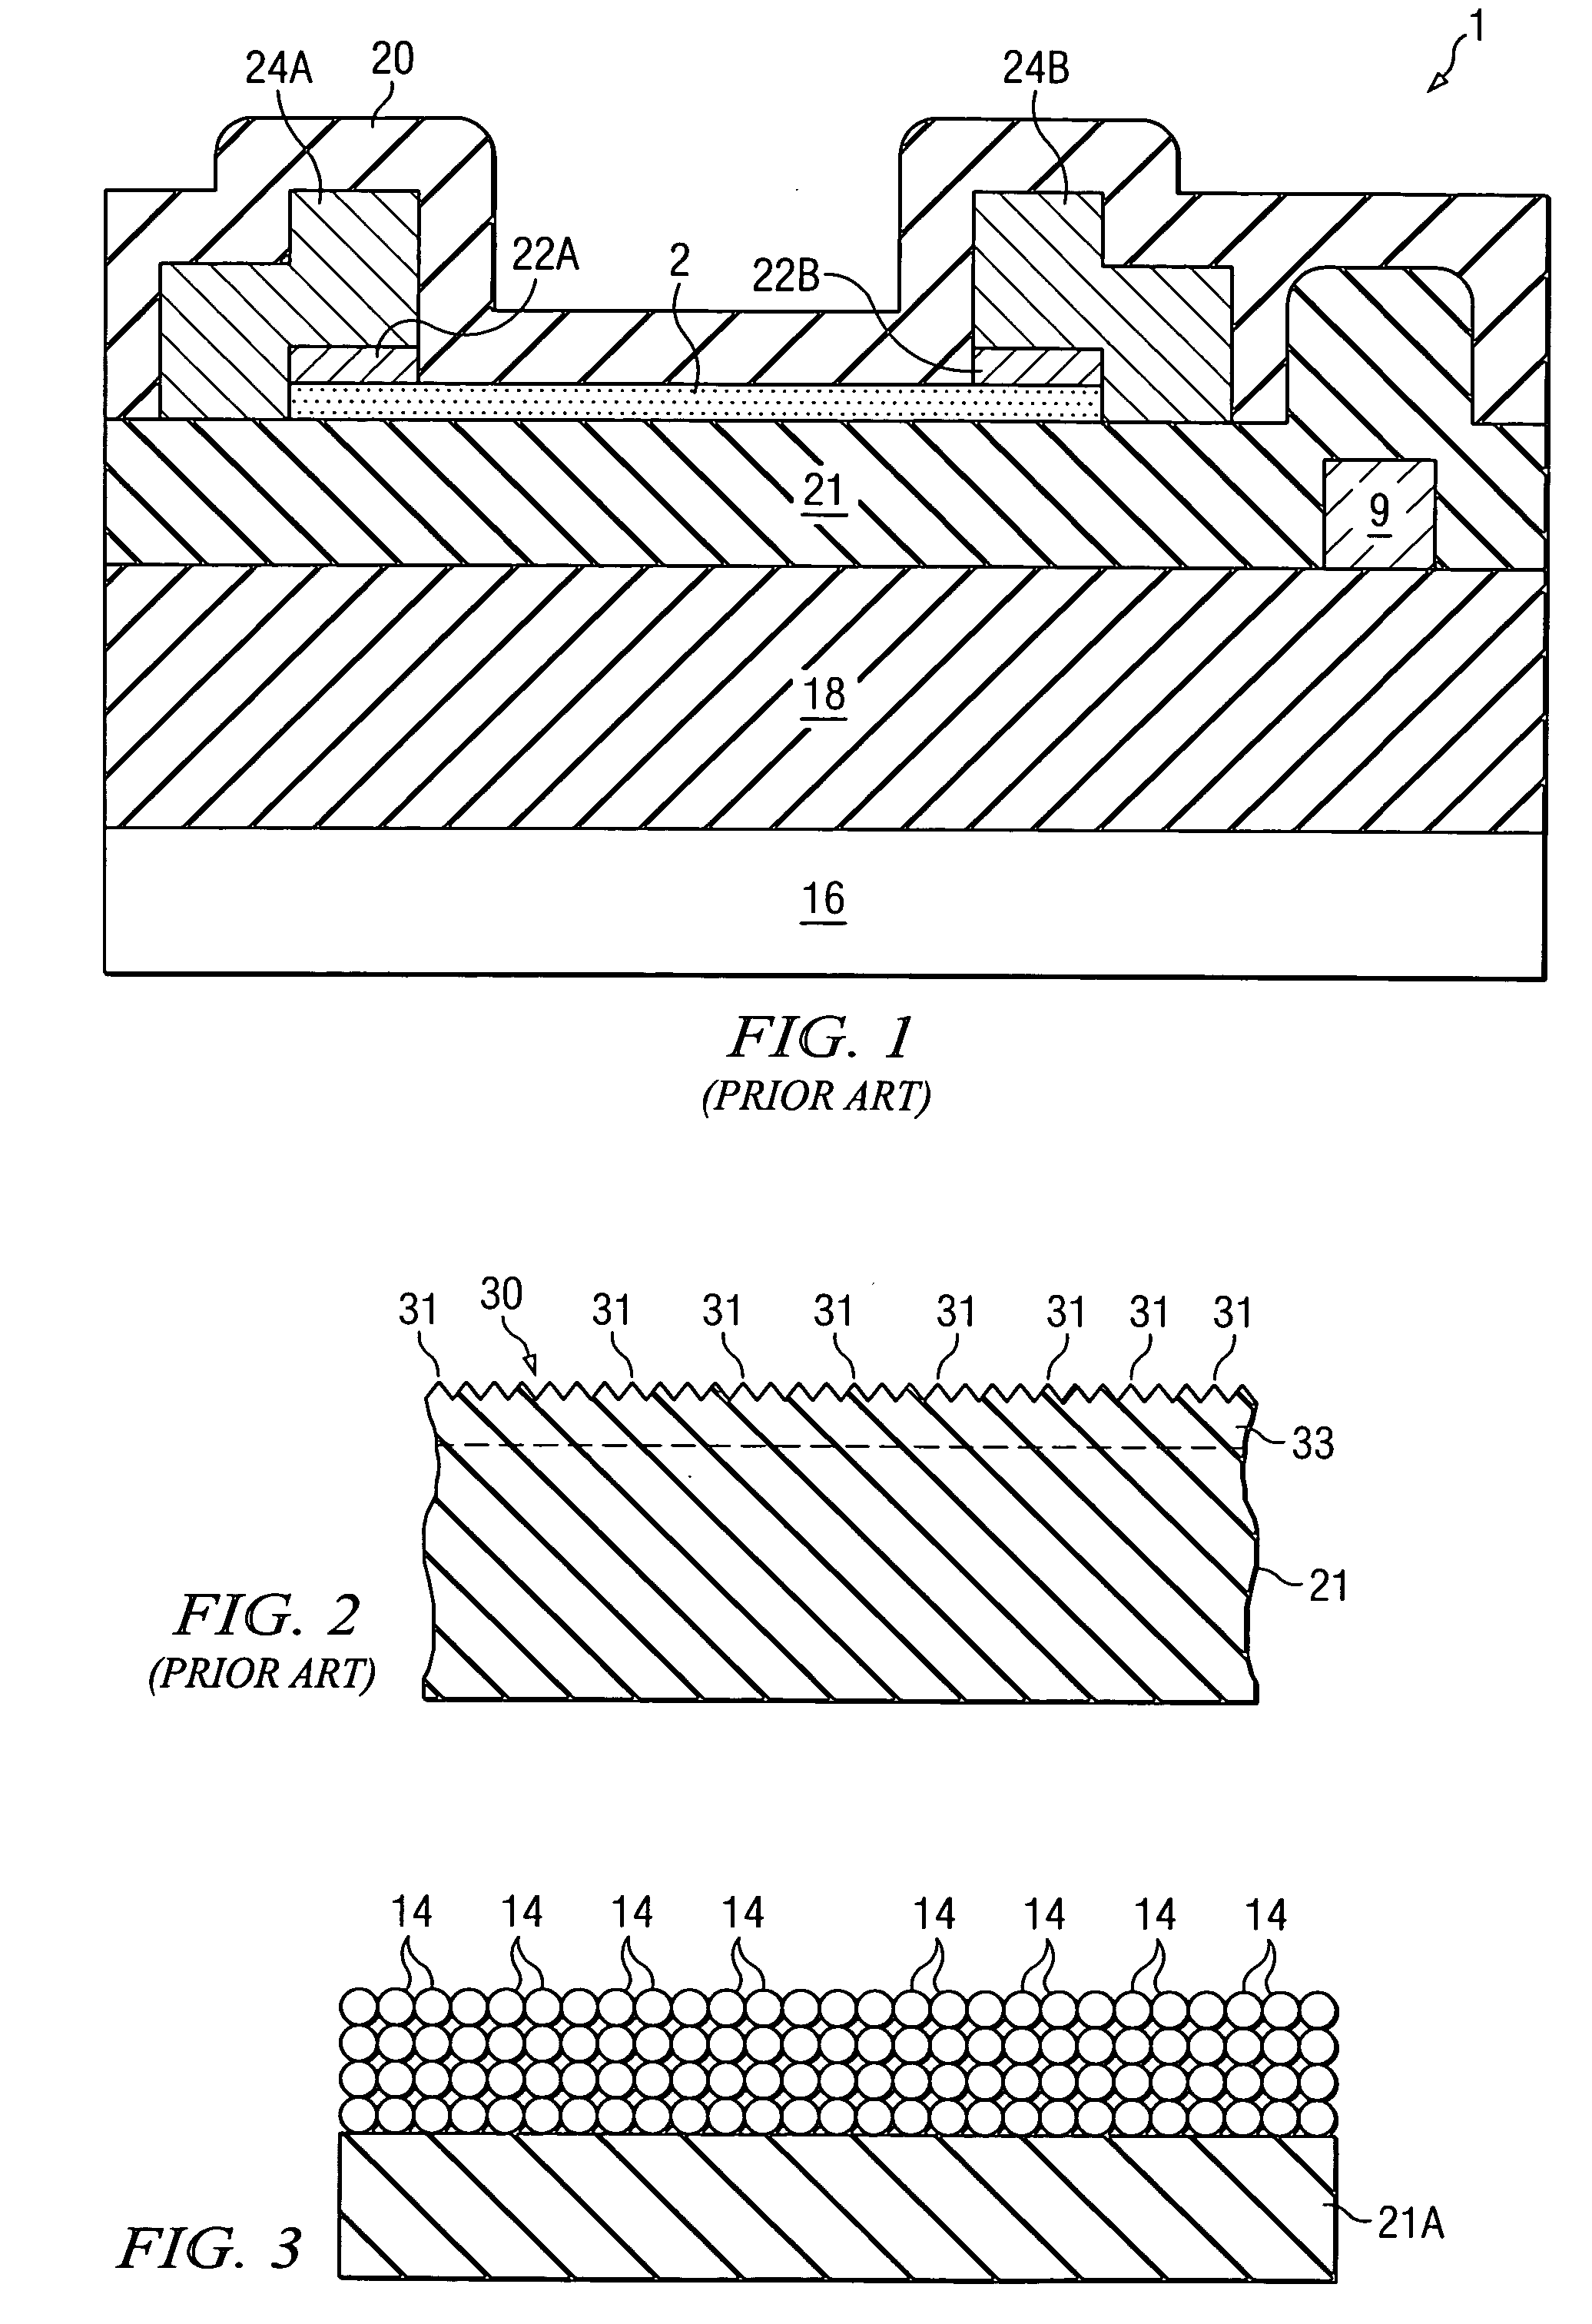 Structure and method for minimizing substrate effect on nucleation during sputtering of thin film resistors